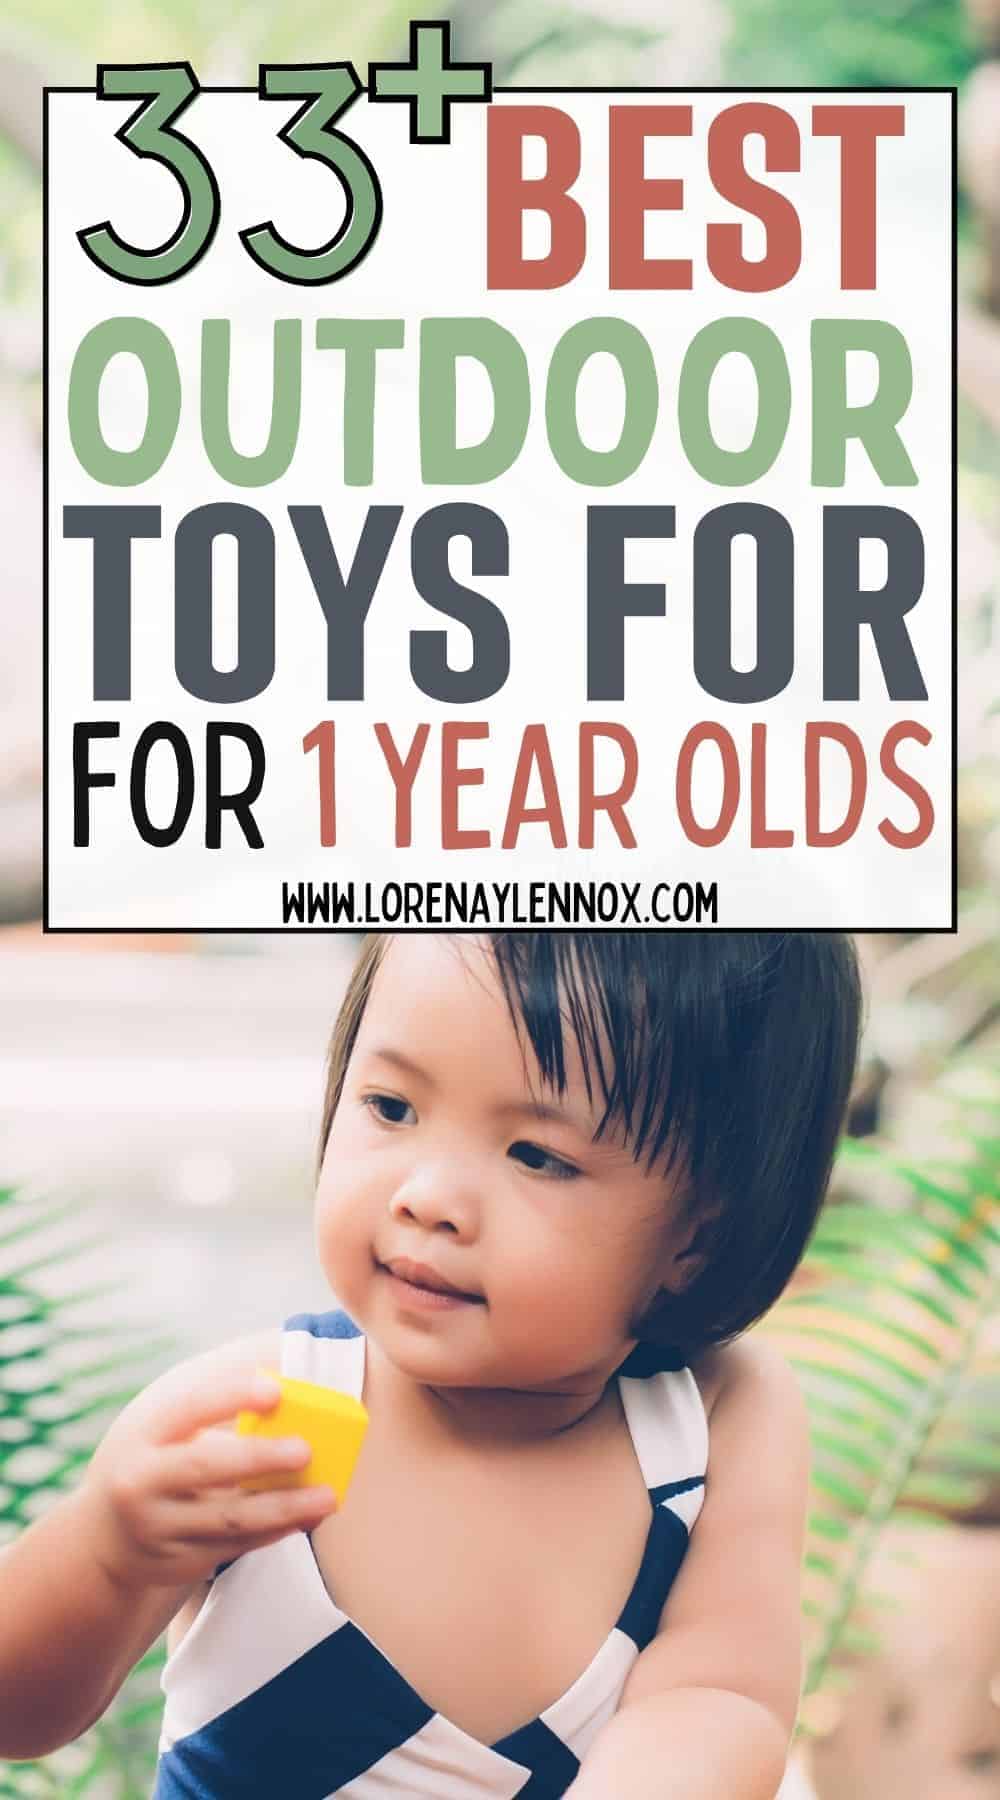 33+ Best Outdoor Toys for 1 Year olds